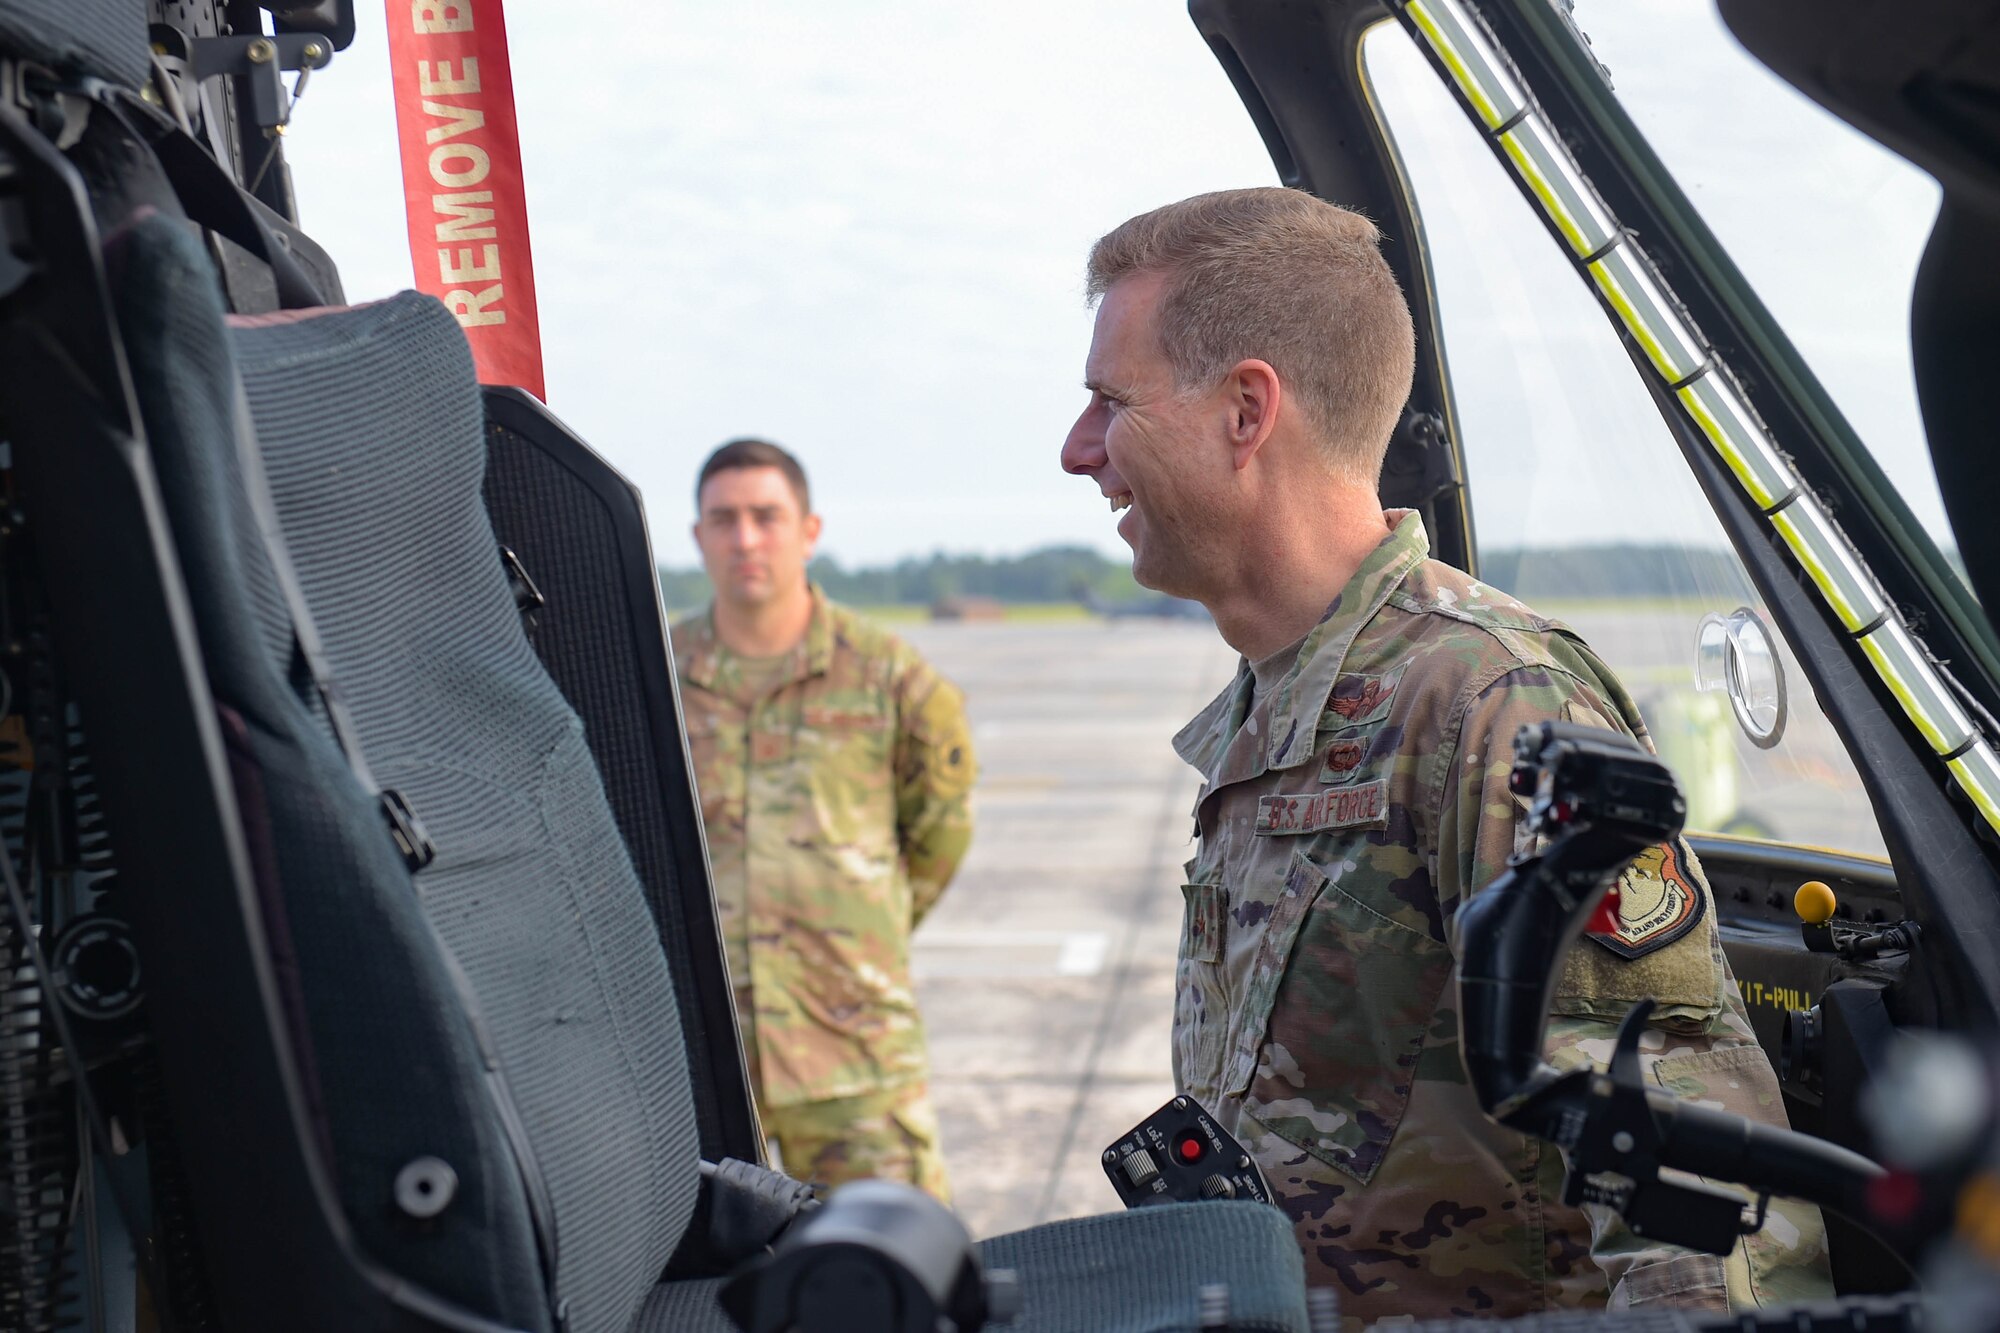 A photo of an Airman smiling.